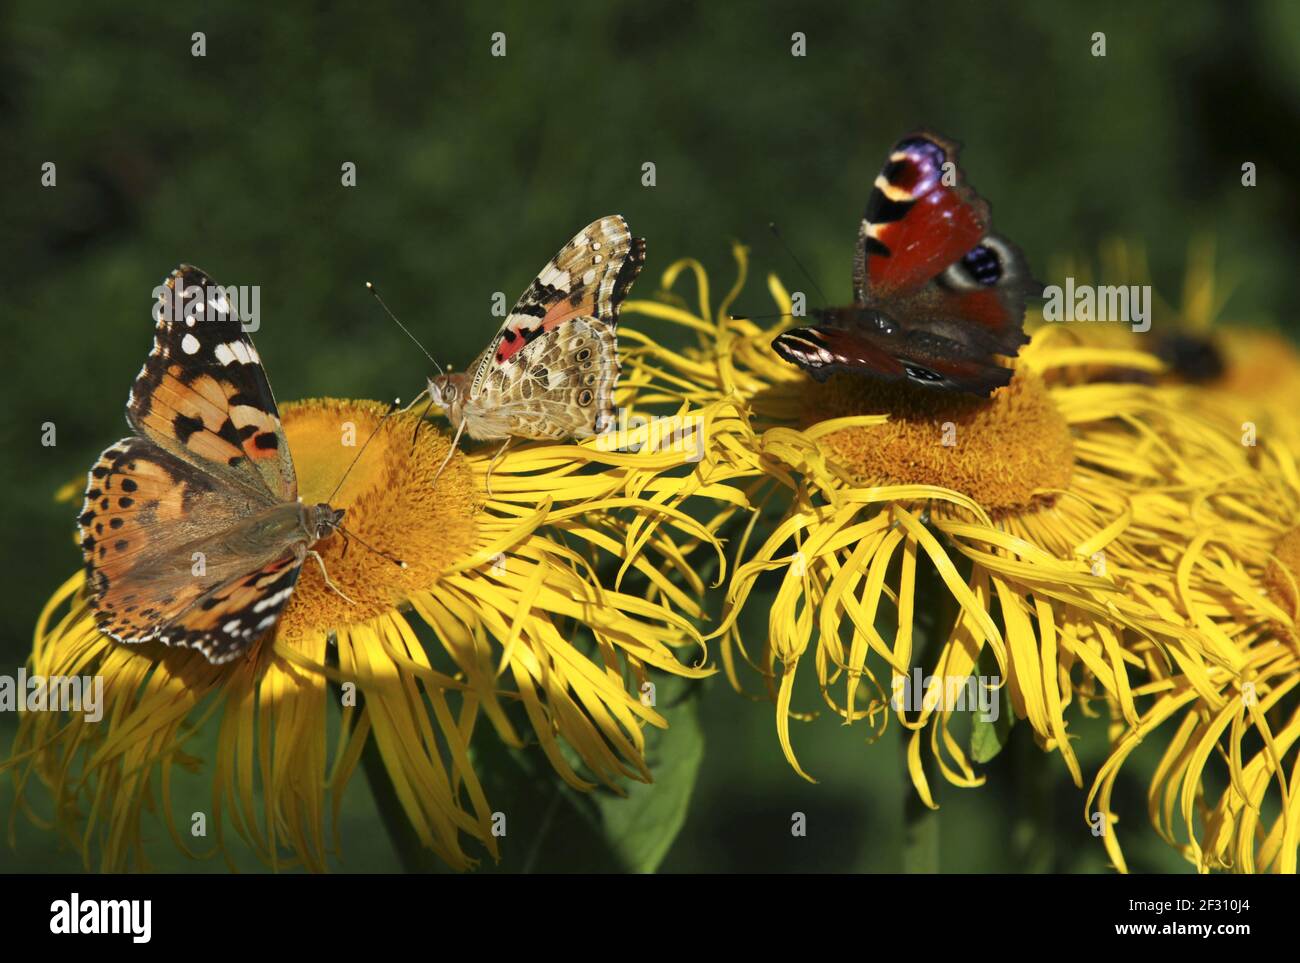 Beautiful yellow blooming flower, (real Alant, Inula helenium) is visited by a butterfly, (Painted l Stock Photo